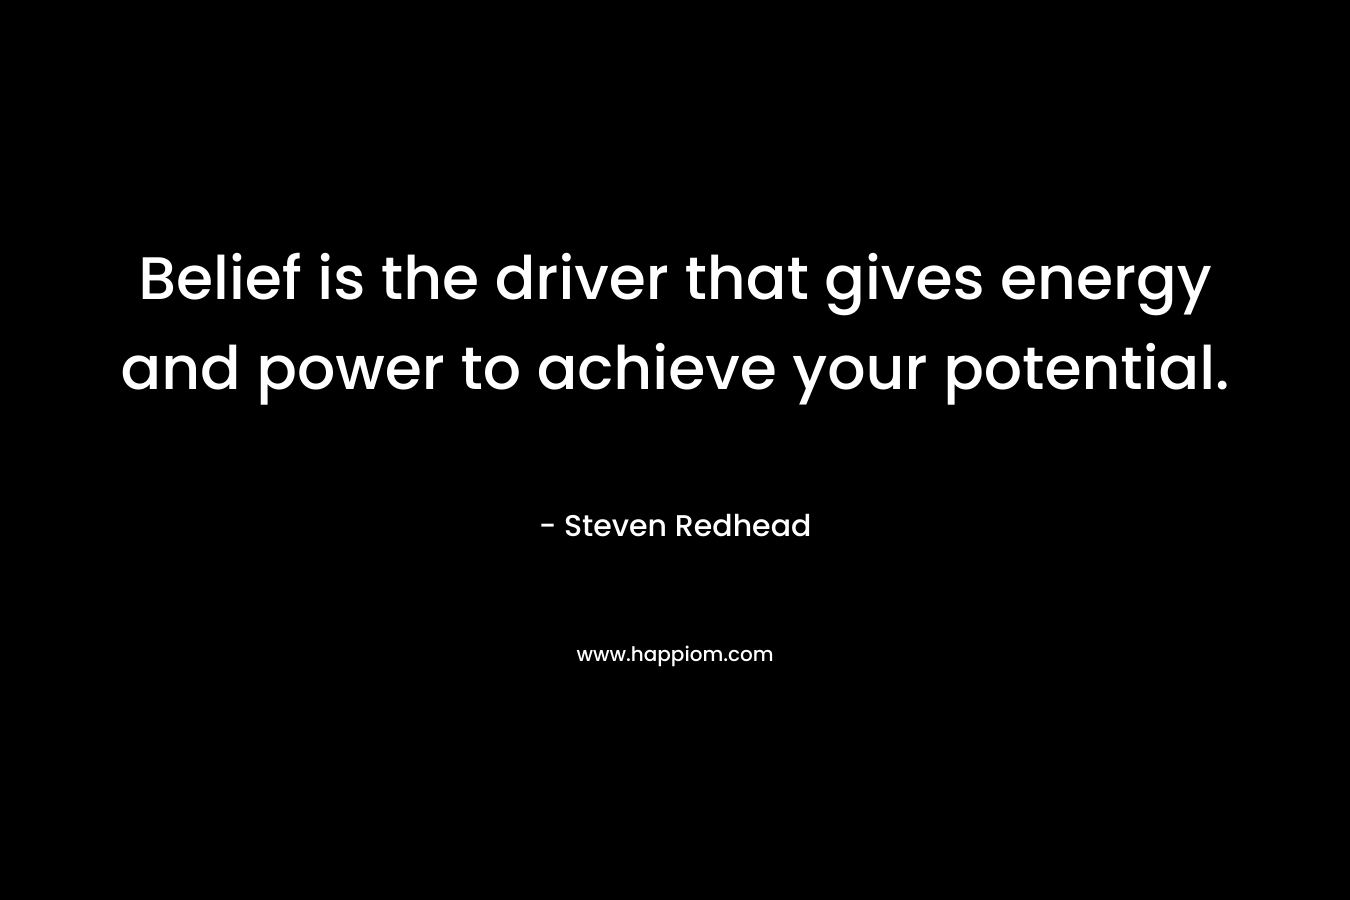 Belief is the driver that gives energy and power to achieve your potential. – Steven Redhead